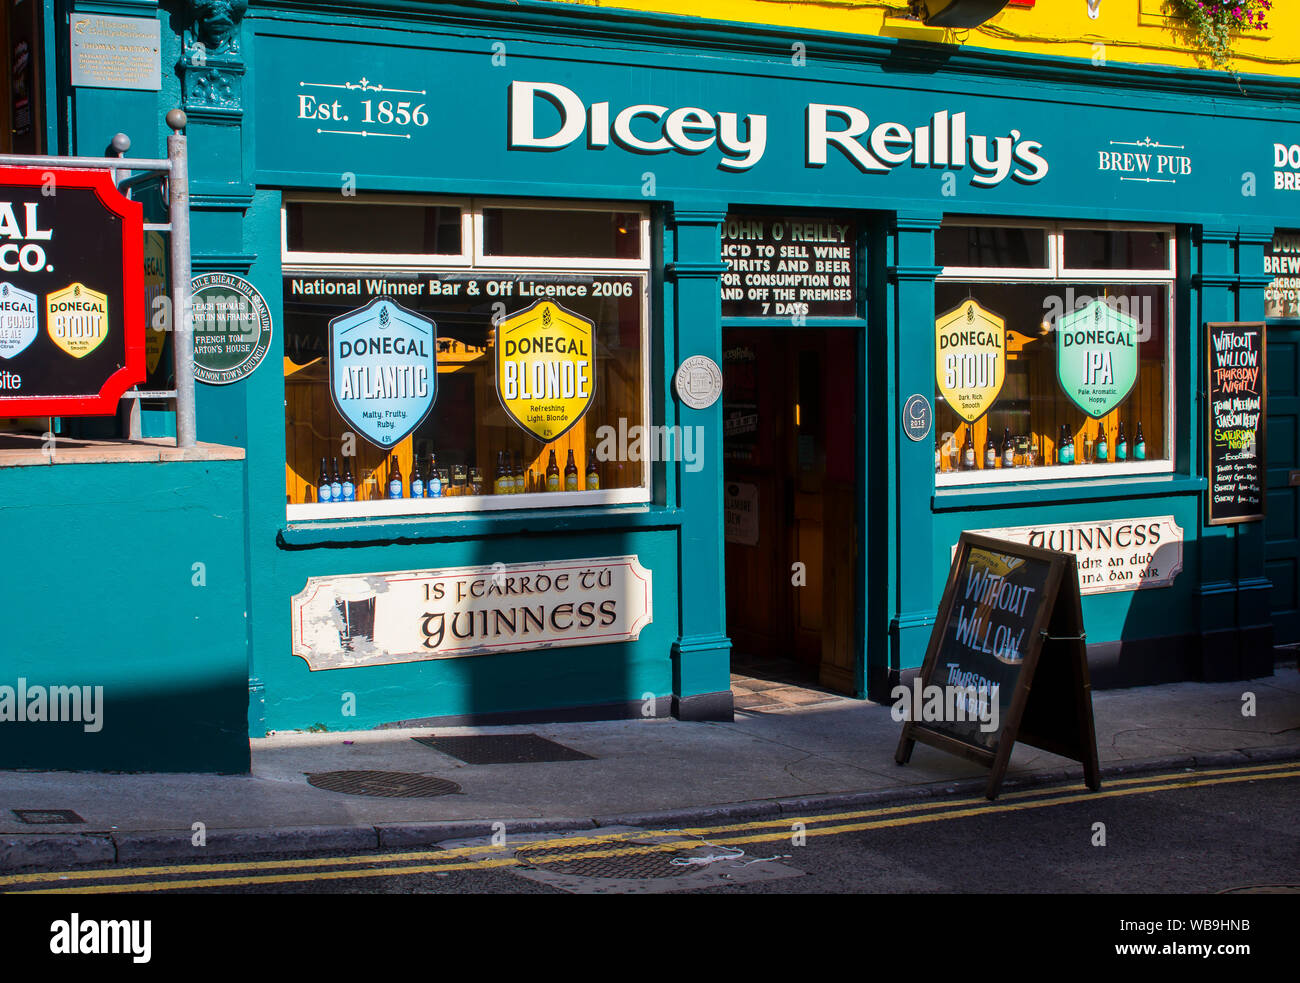 21 August 2019 The outside of Dicey Reilly's Pub in Bundoran Town in County Donegal Ireland Stock Photo